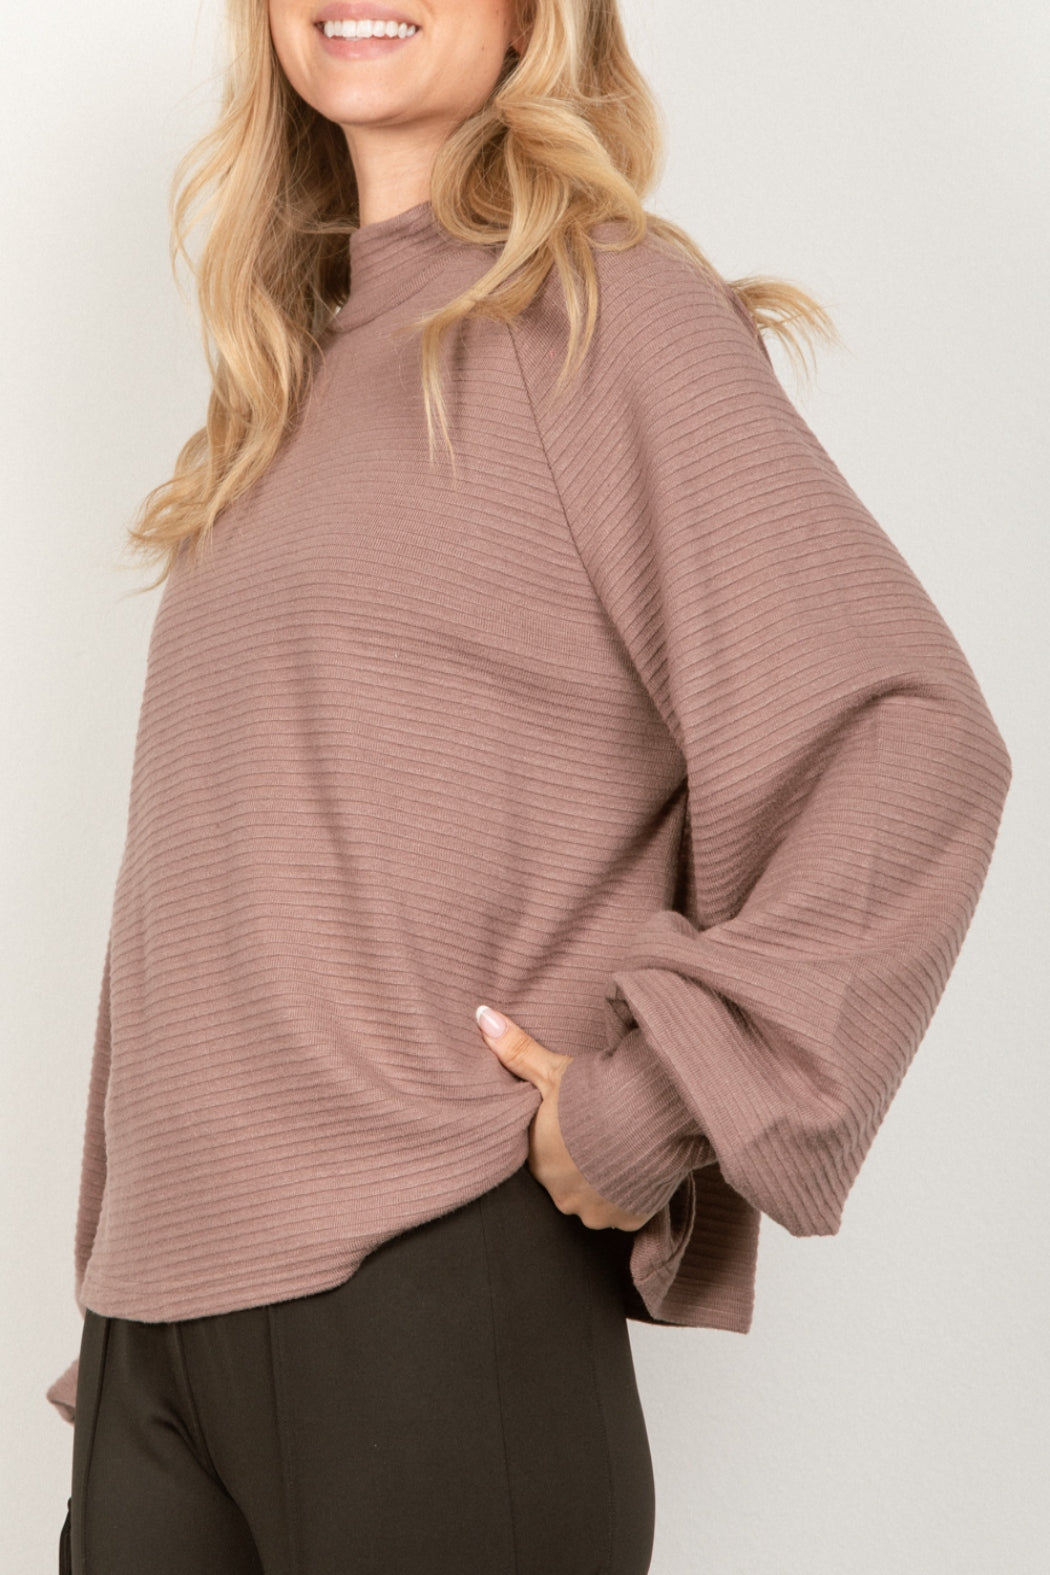 Lost Woods Mock Neck Textured Knit Top